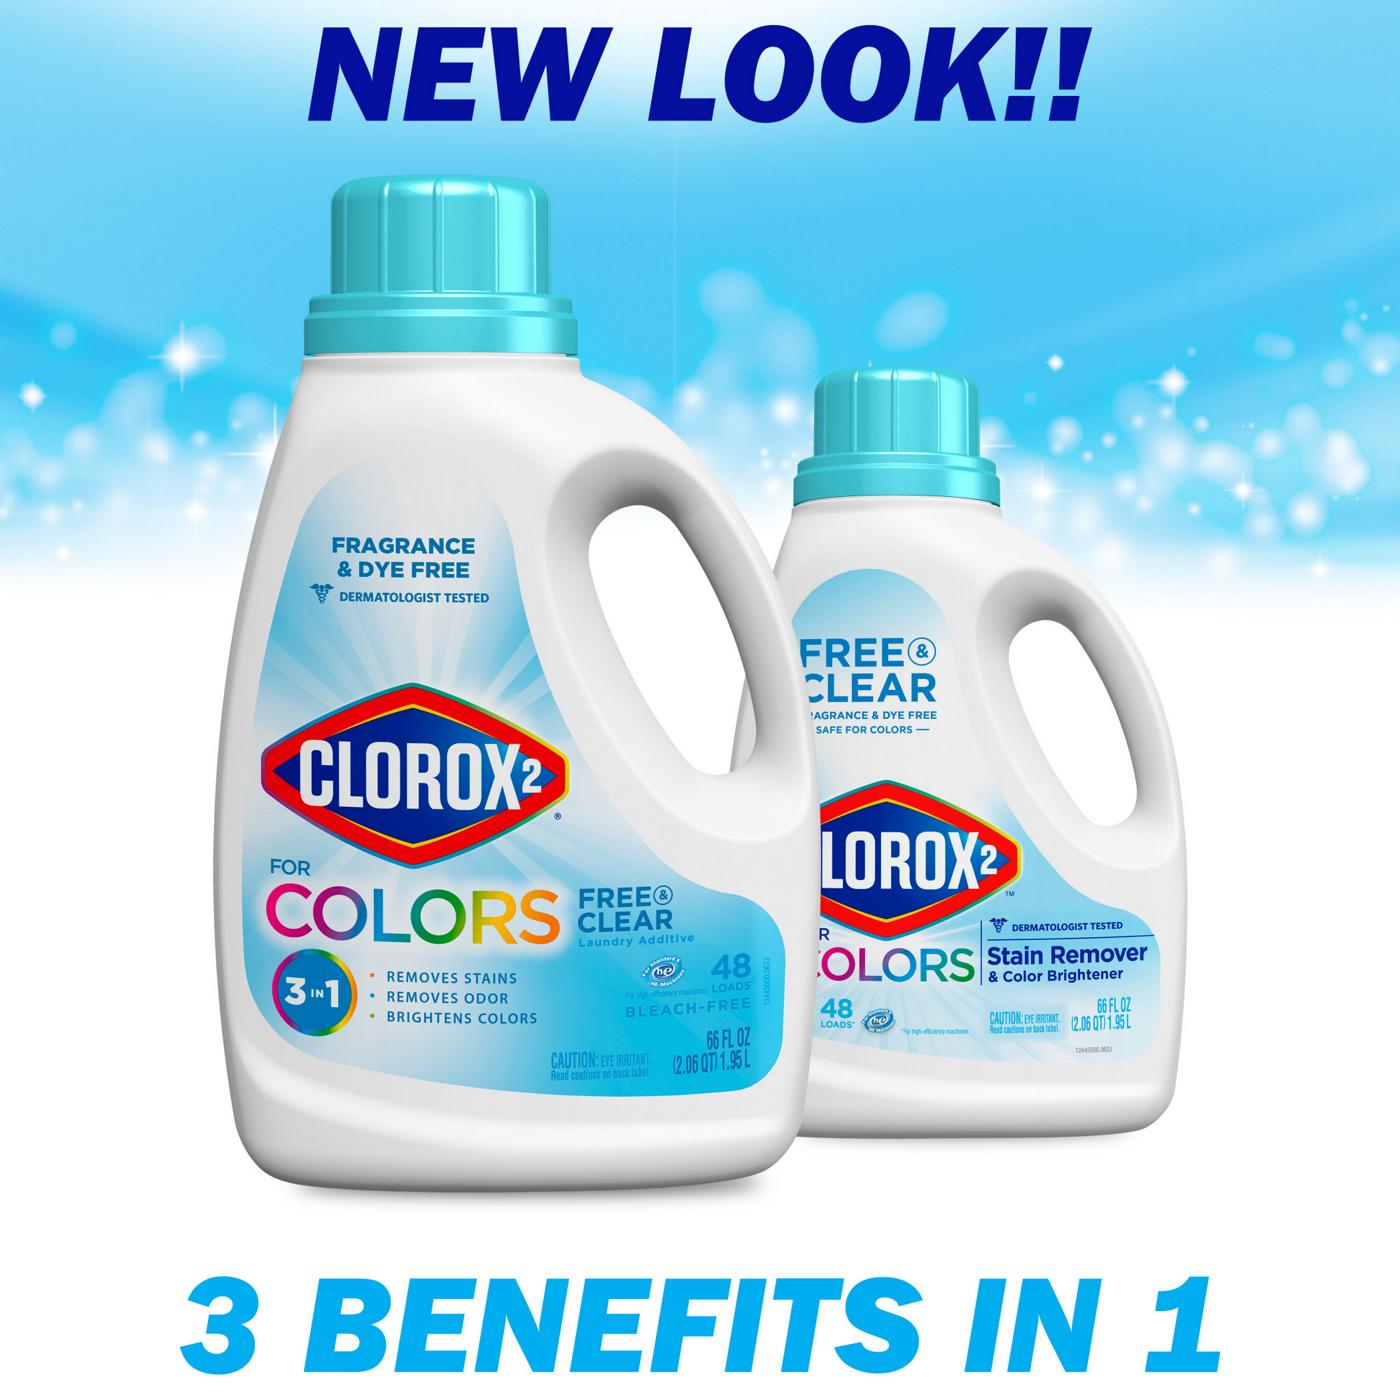 Clorox 2 2 for Colors 3-in-1 HE Laundry Additive, 48 Loads - Free & Clear; image 3 of 3